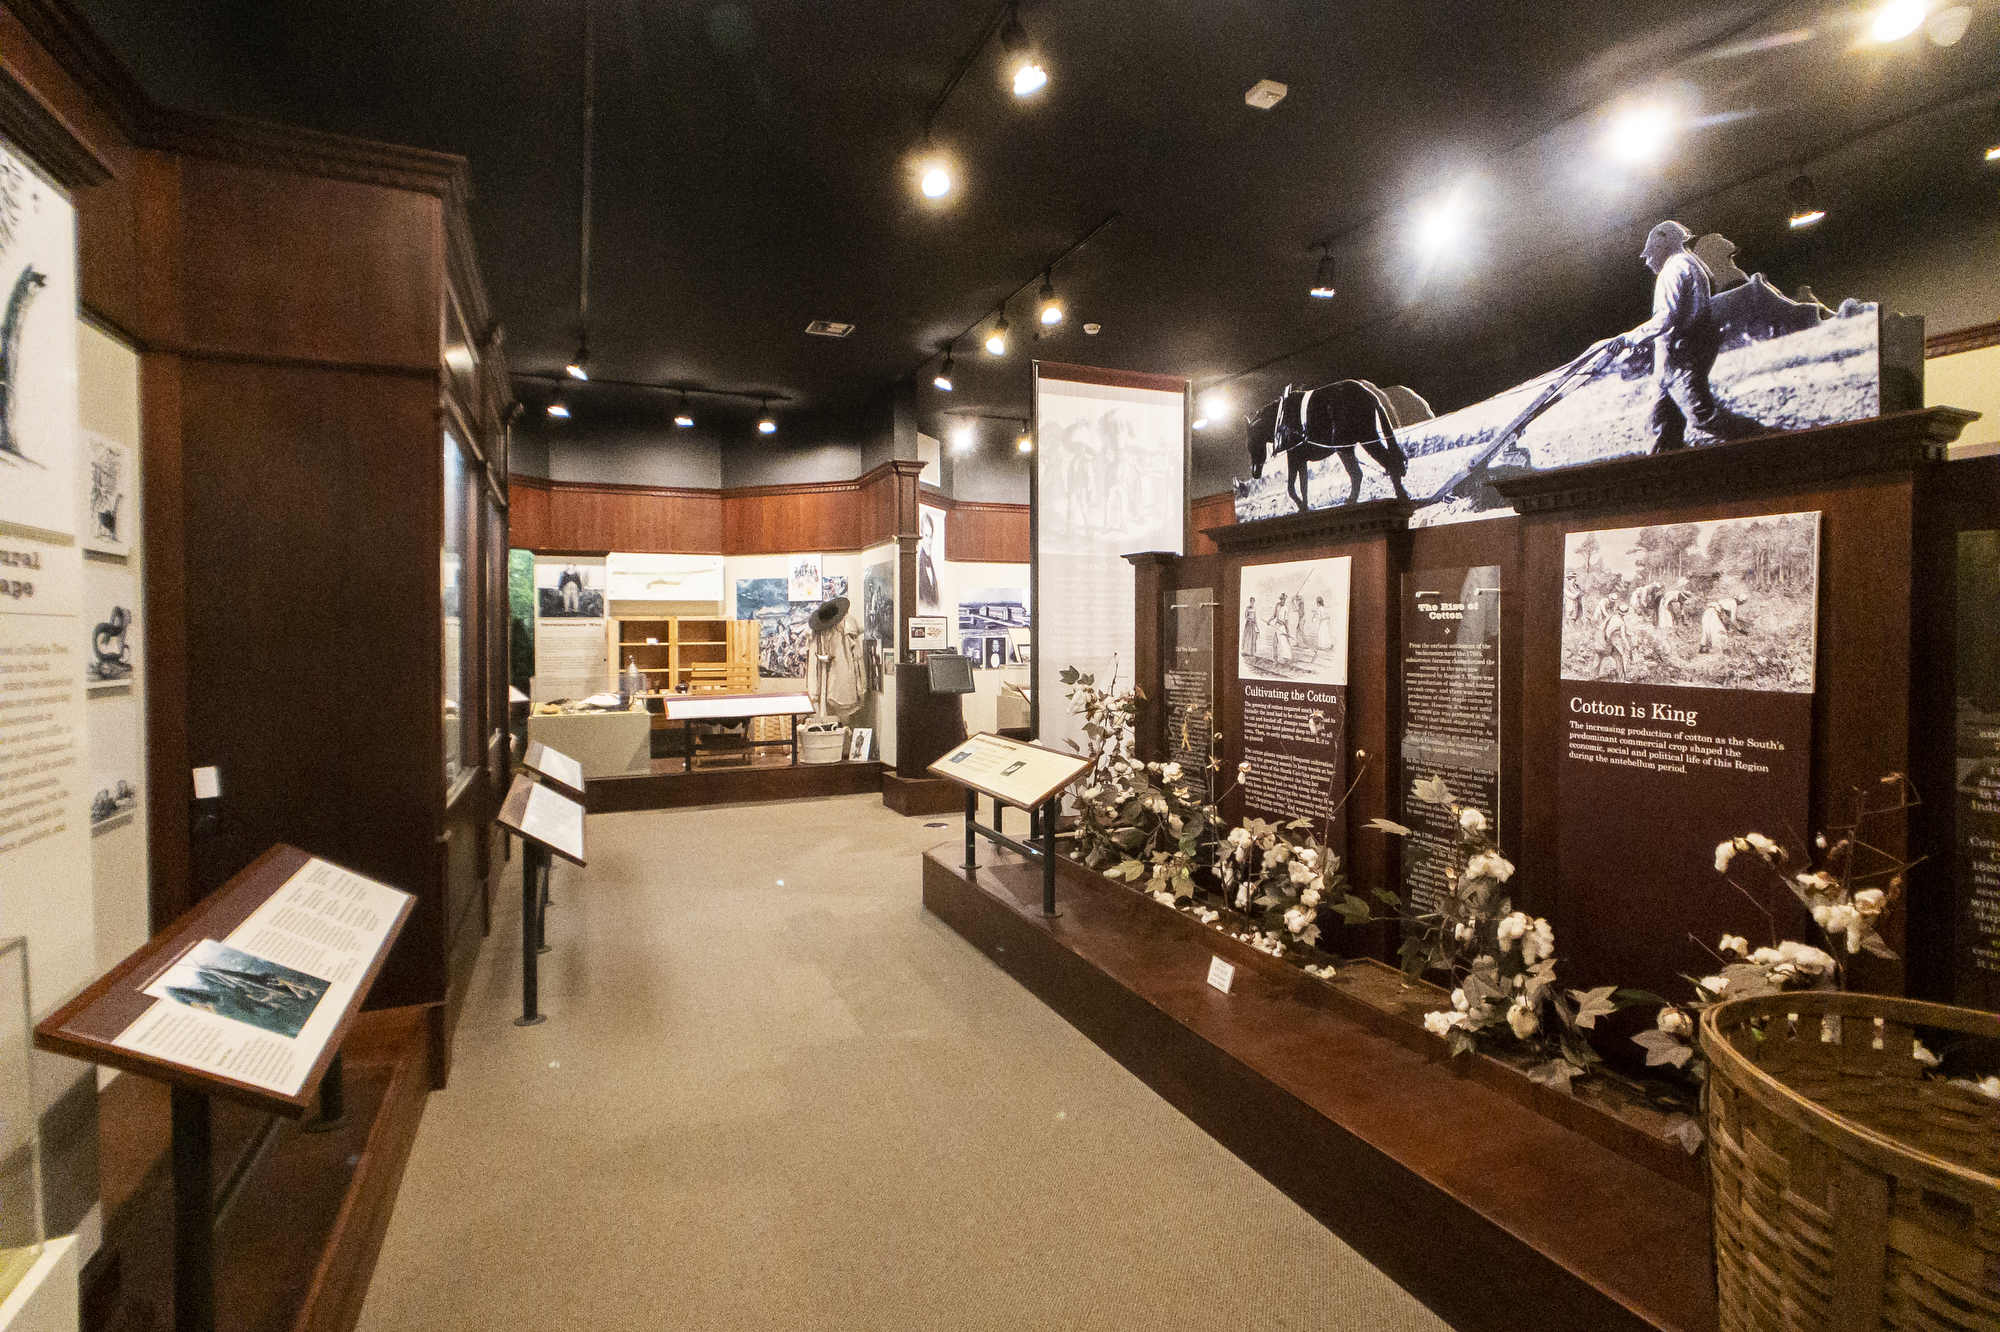 Exhibits inside the Joanne T. Rainsford Discovery Center in Edgefield, South Carolina.